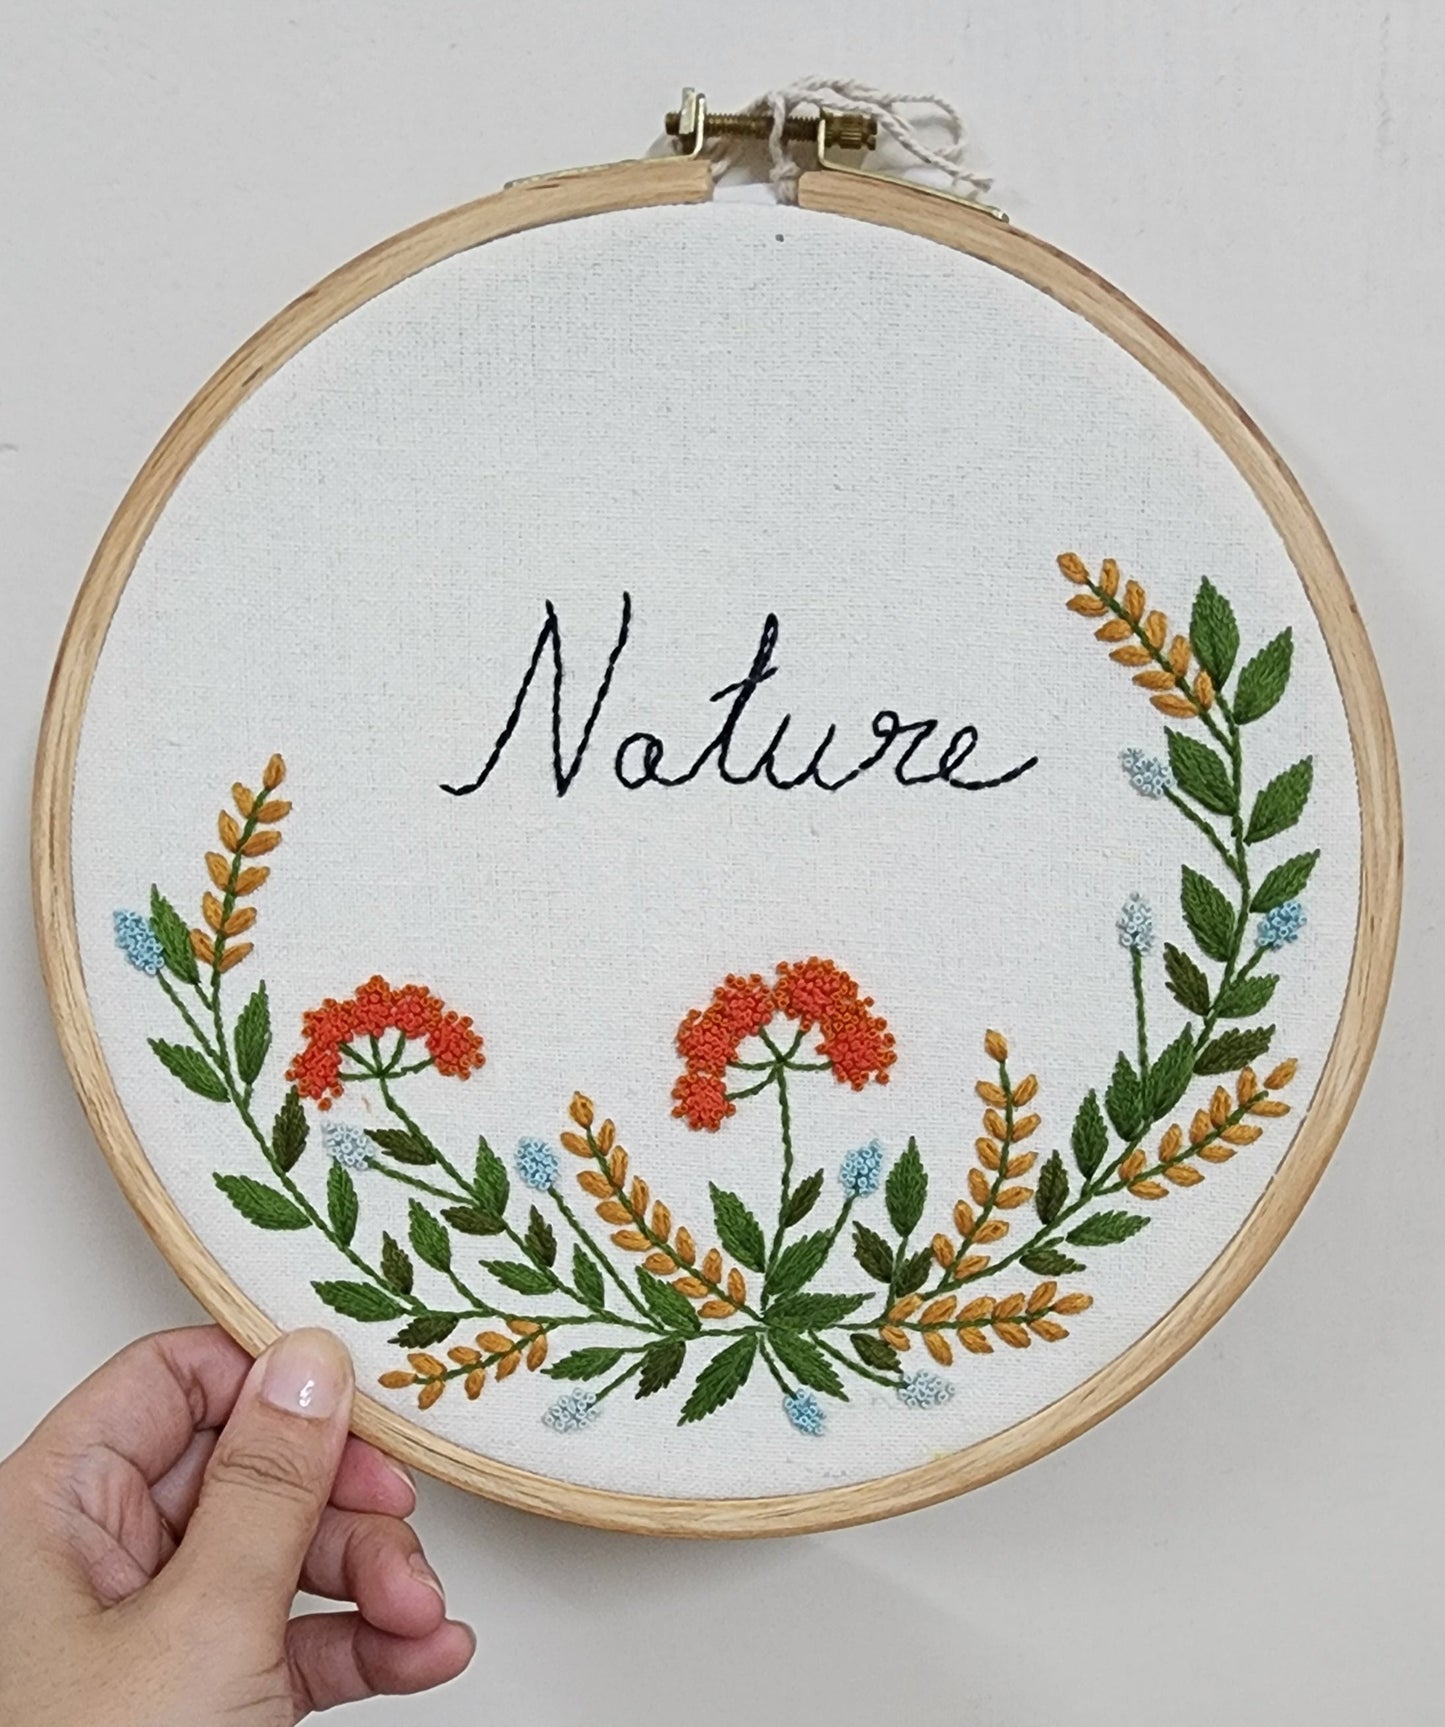 Ikali - Nature - Hand-embroidered Wall-hanging Hoop